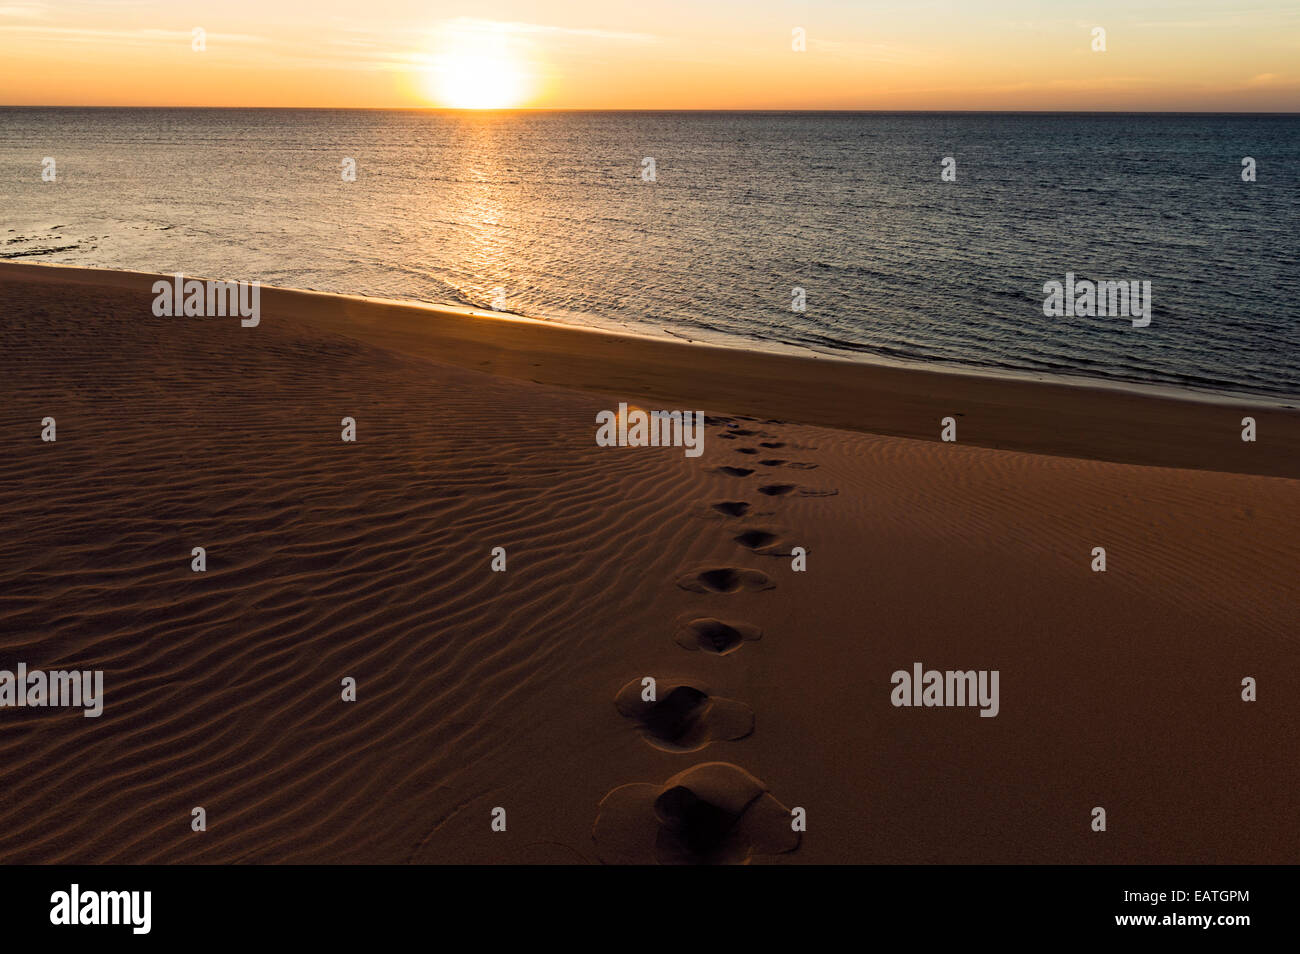 Footprints lead down a sand dune at sunset to a deserted ocean beach. Stock Photo